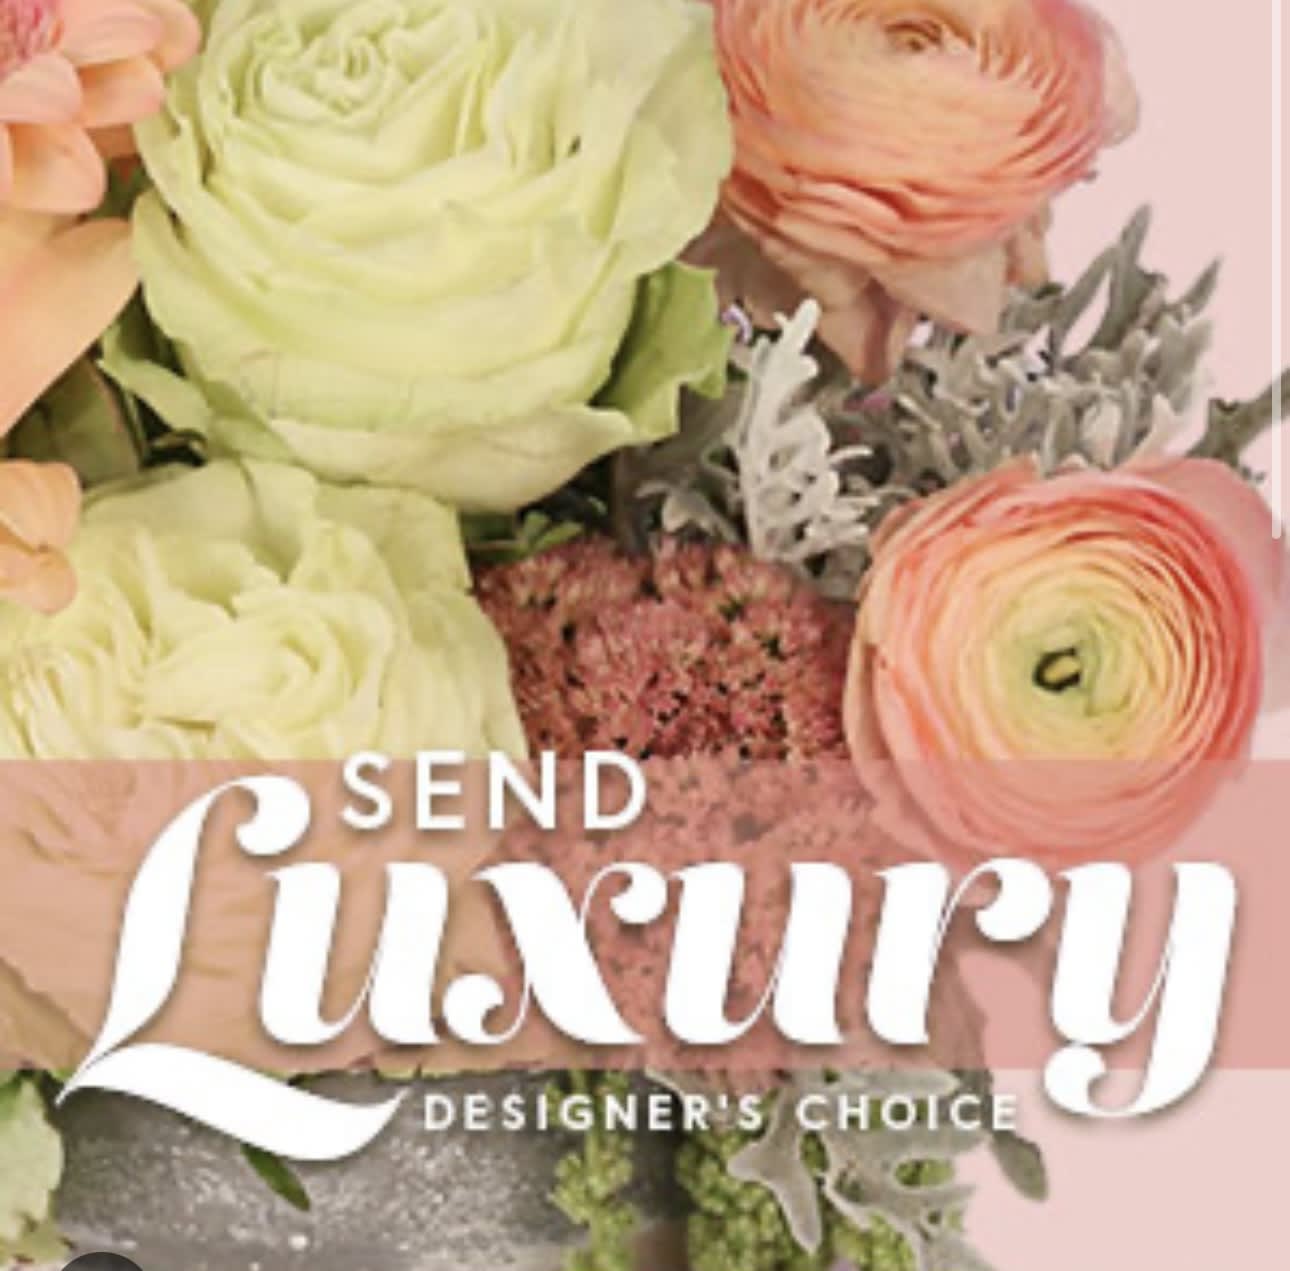 Luxury Designer Choice  -    Let the designer create a beautiful arrangement .This enchanting arrangement features of gorgeous  selection of flowers .Complemented by delicate ranunculus  ,and garden roses .Luxury Designer arrangement is a perfect way to express your love and appreciation for someone special in your life . Premium options with champagne or wine , by your request . Surprise your loved ones  today . 